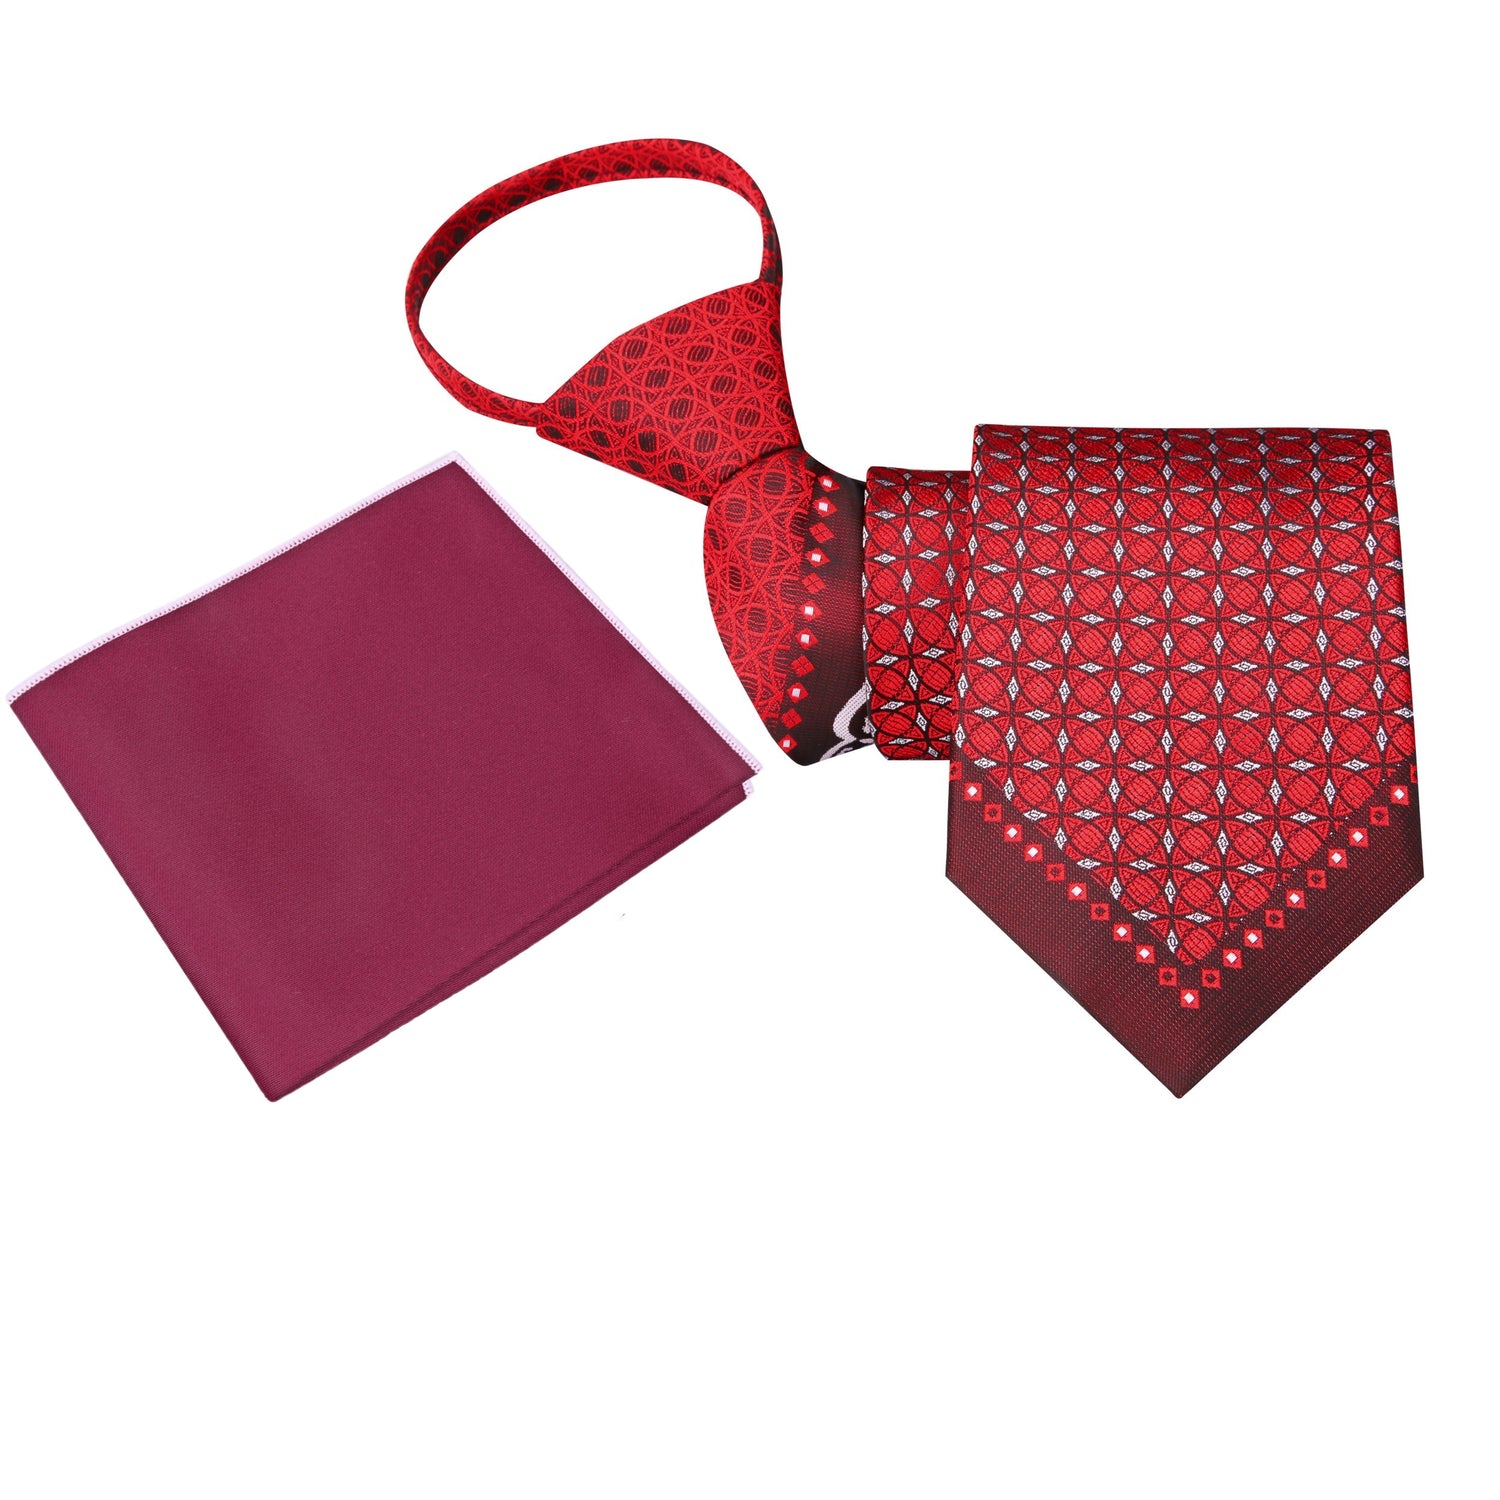 Zip Tie: A Red and Light Brown Sphere Abstract Pattern Silk Necktie with Dark Red Tie Tip, Deep Red Pocket Square